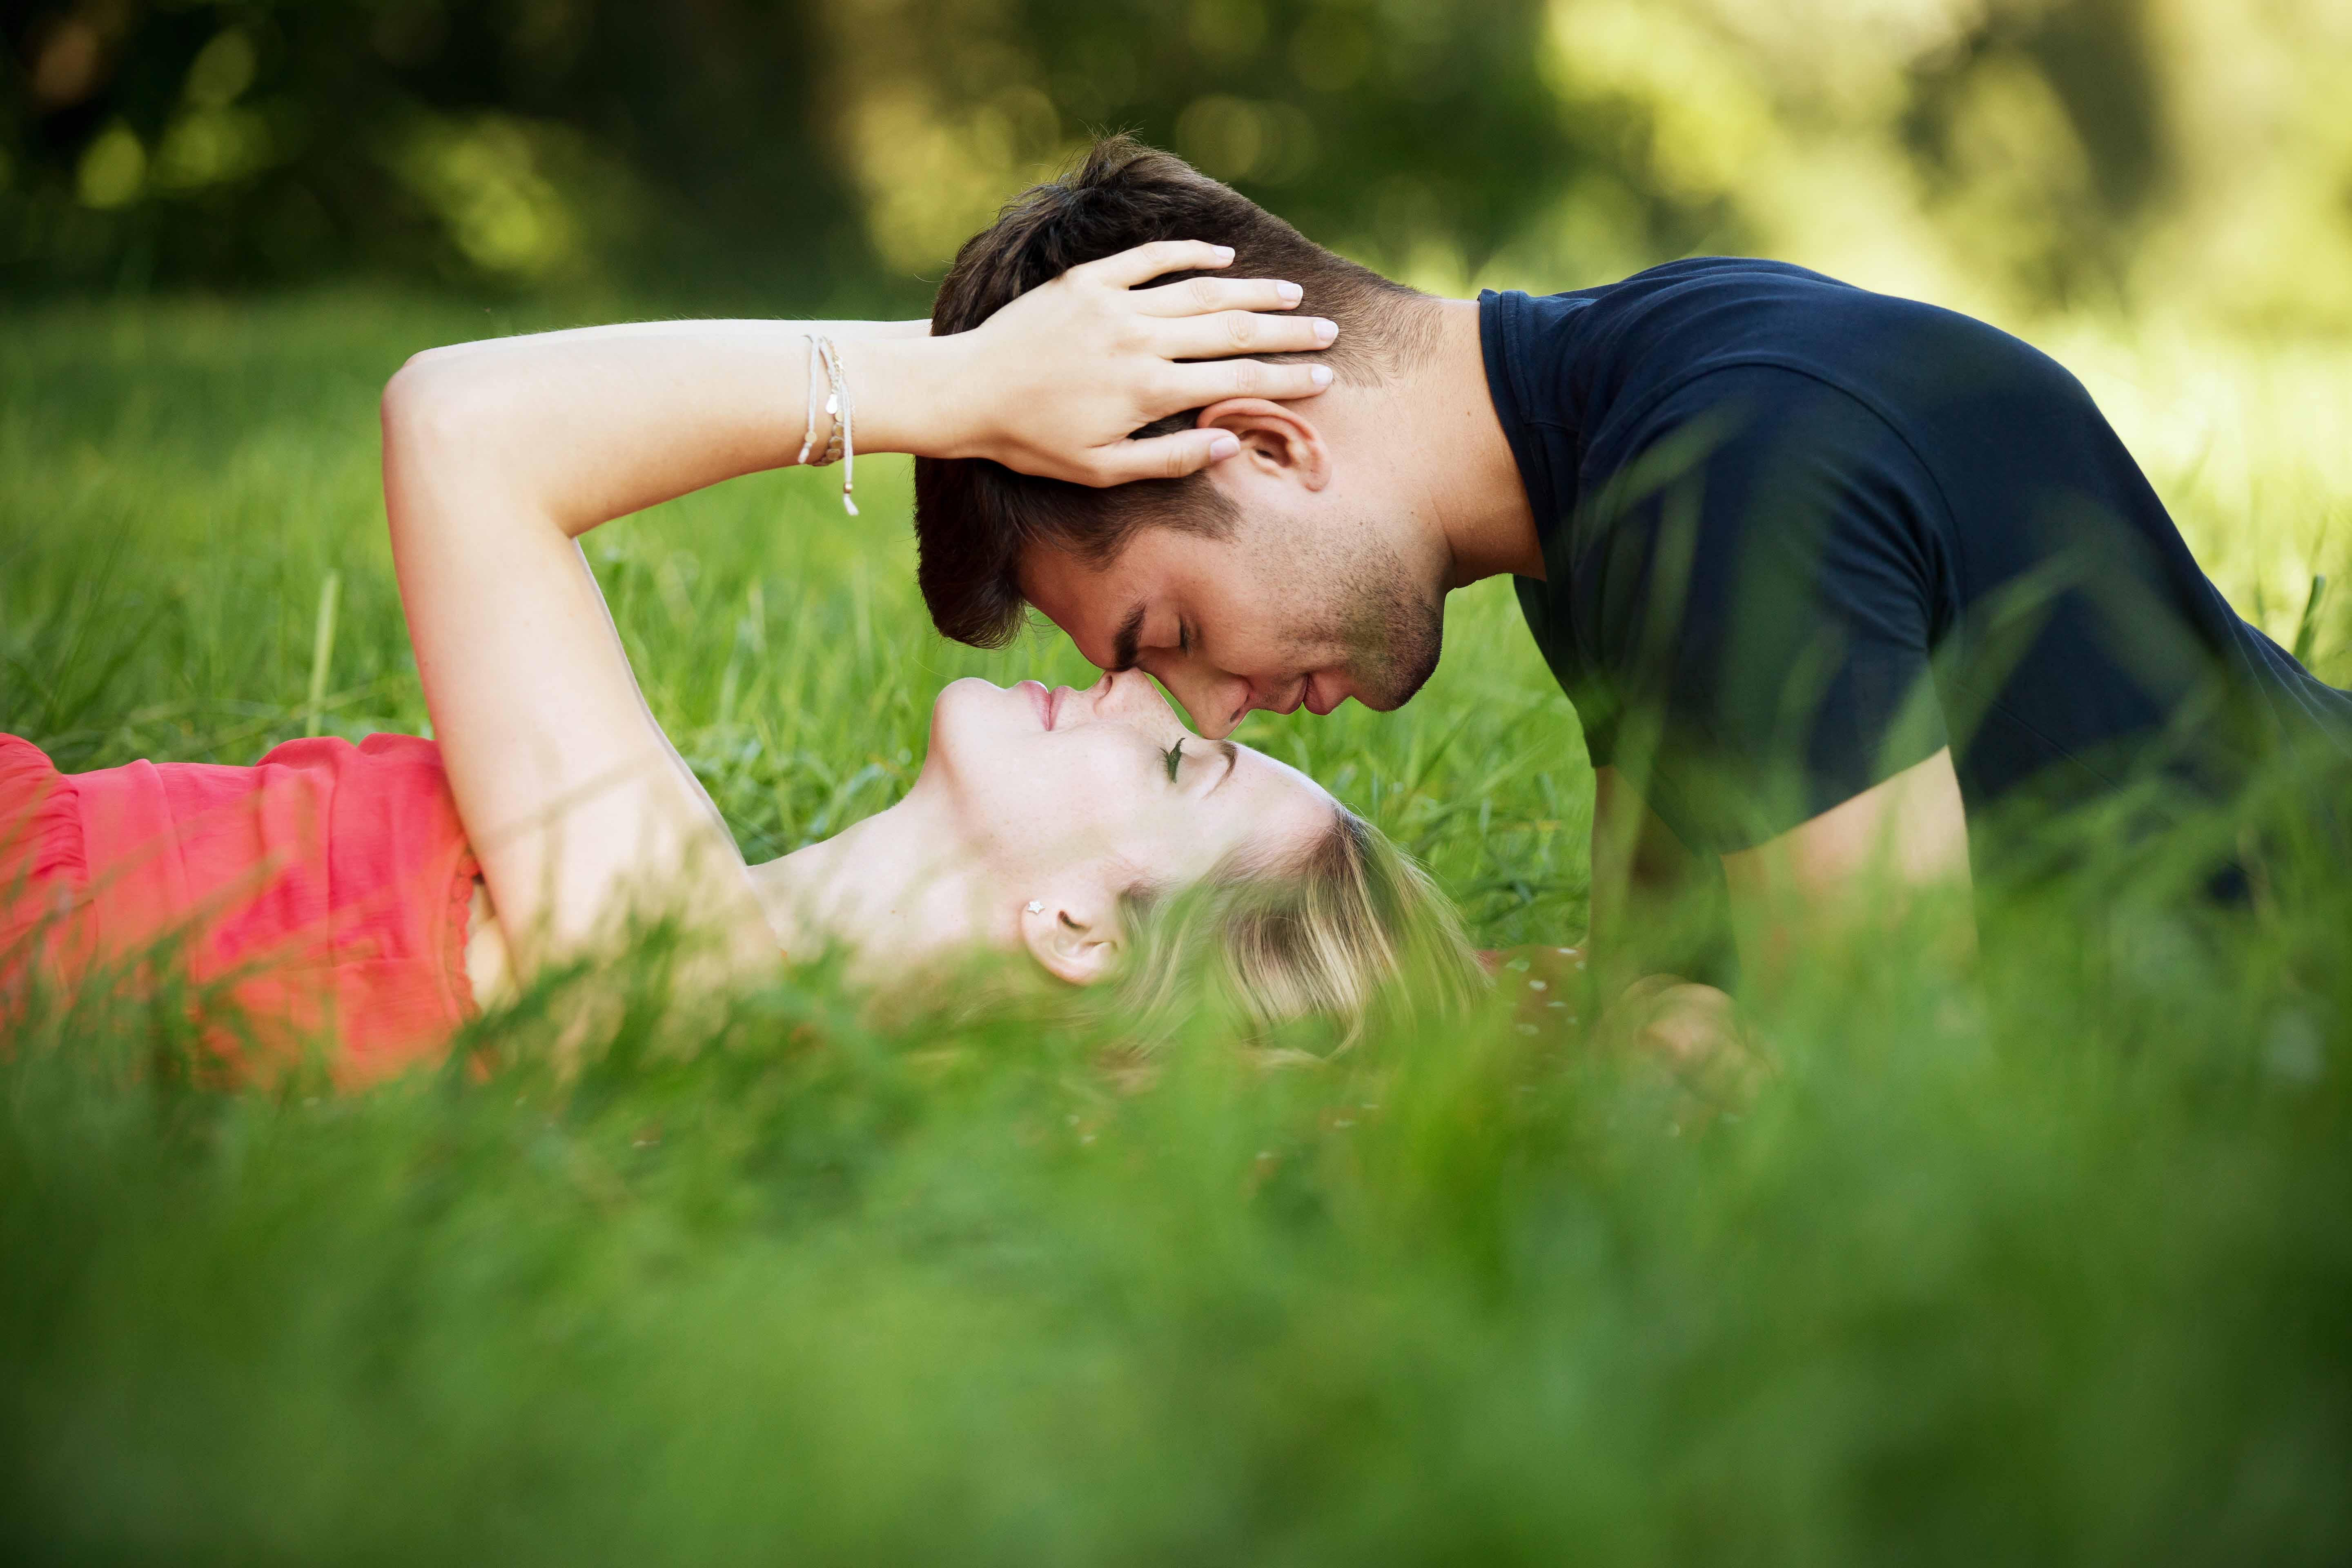 Stylish with romantic couple kiss on grass love wallpaper Love